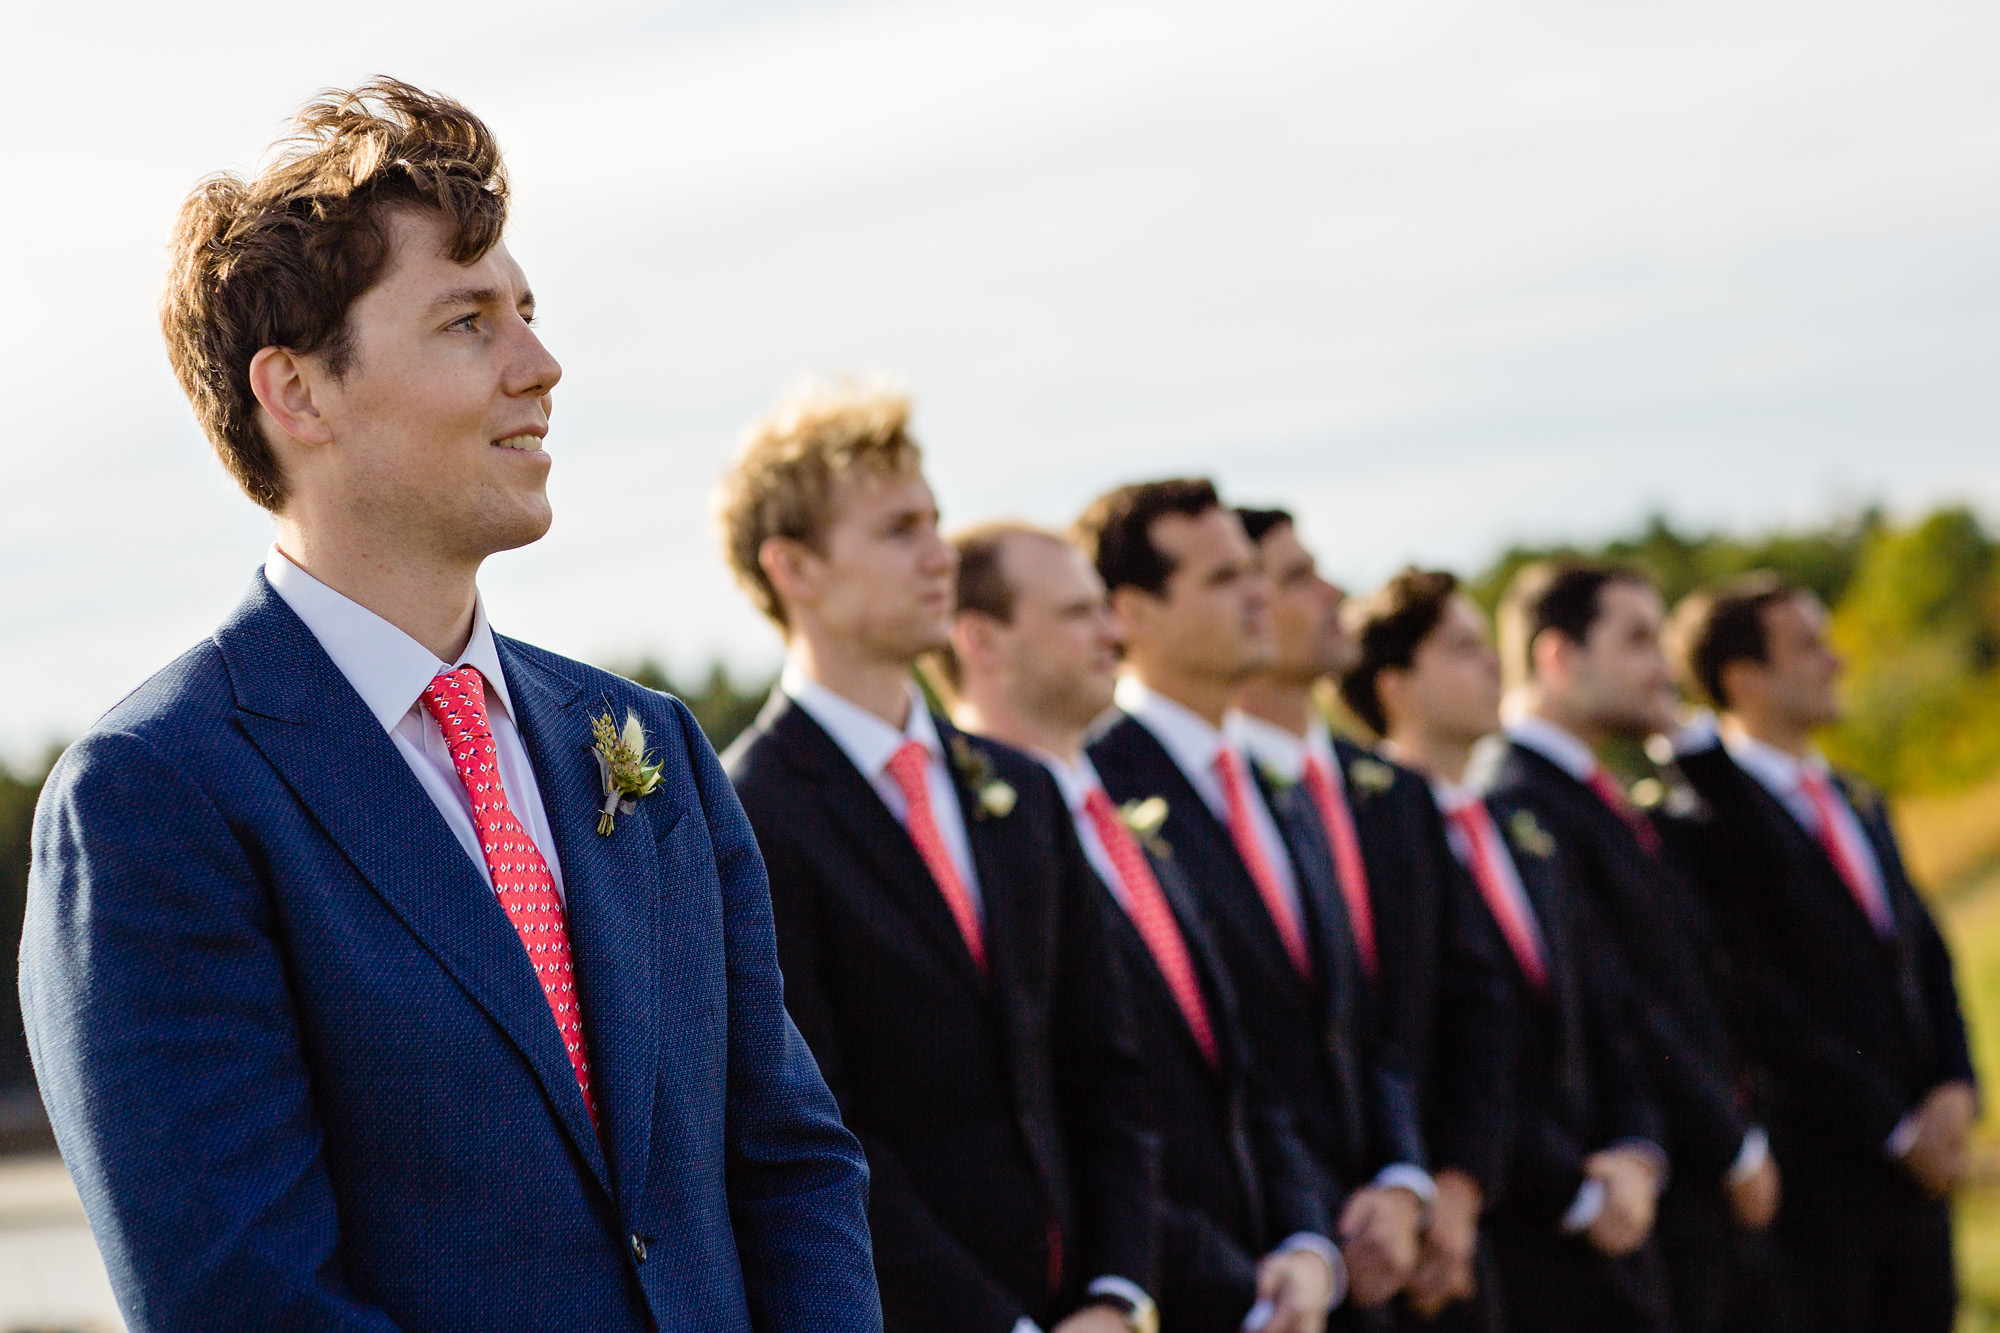 The groom watches the bride as she walks down the aisle at his Maine wedding